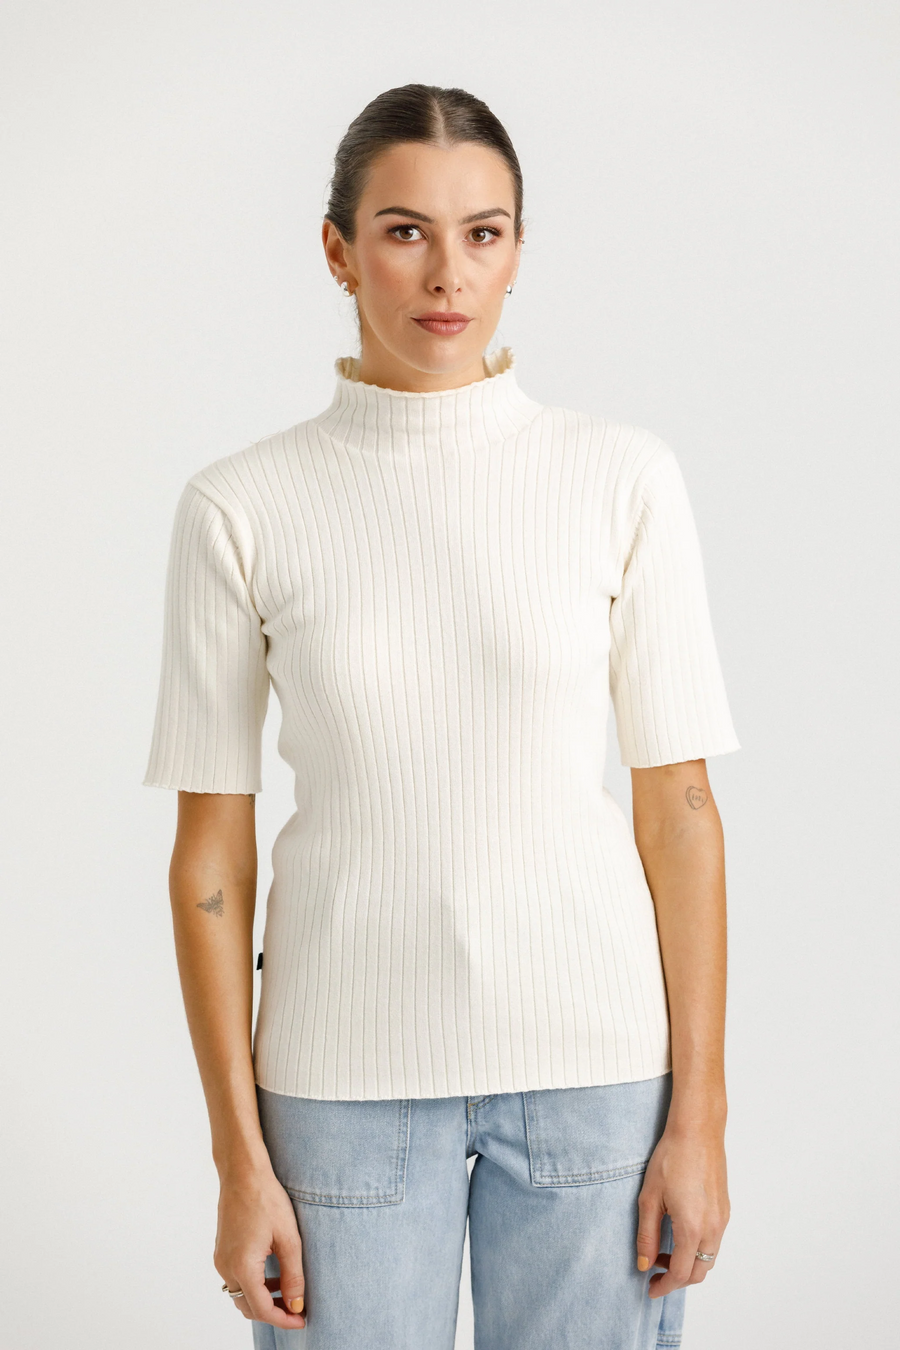 THING THING SHORT SLEEVE TURTLE NECK - UNBLEACHED - WILDROSE